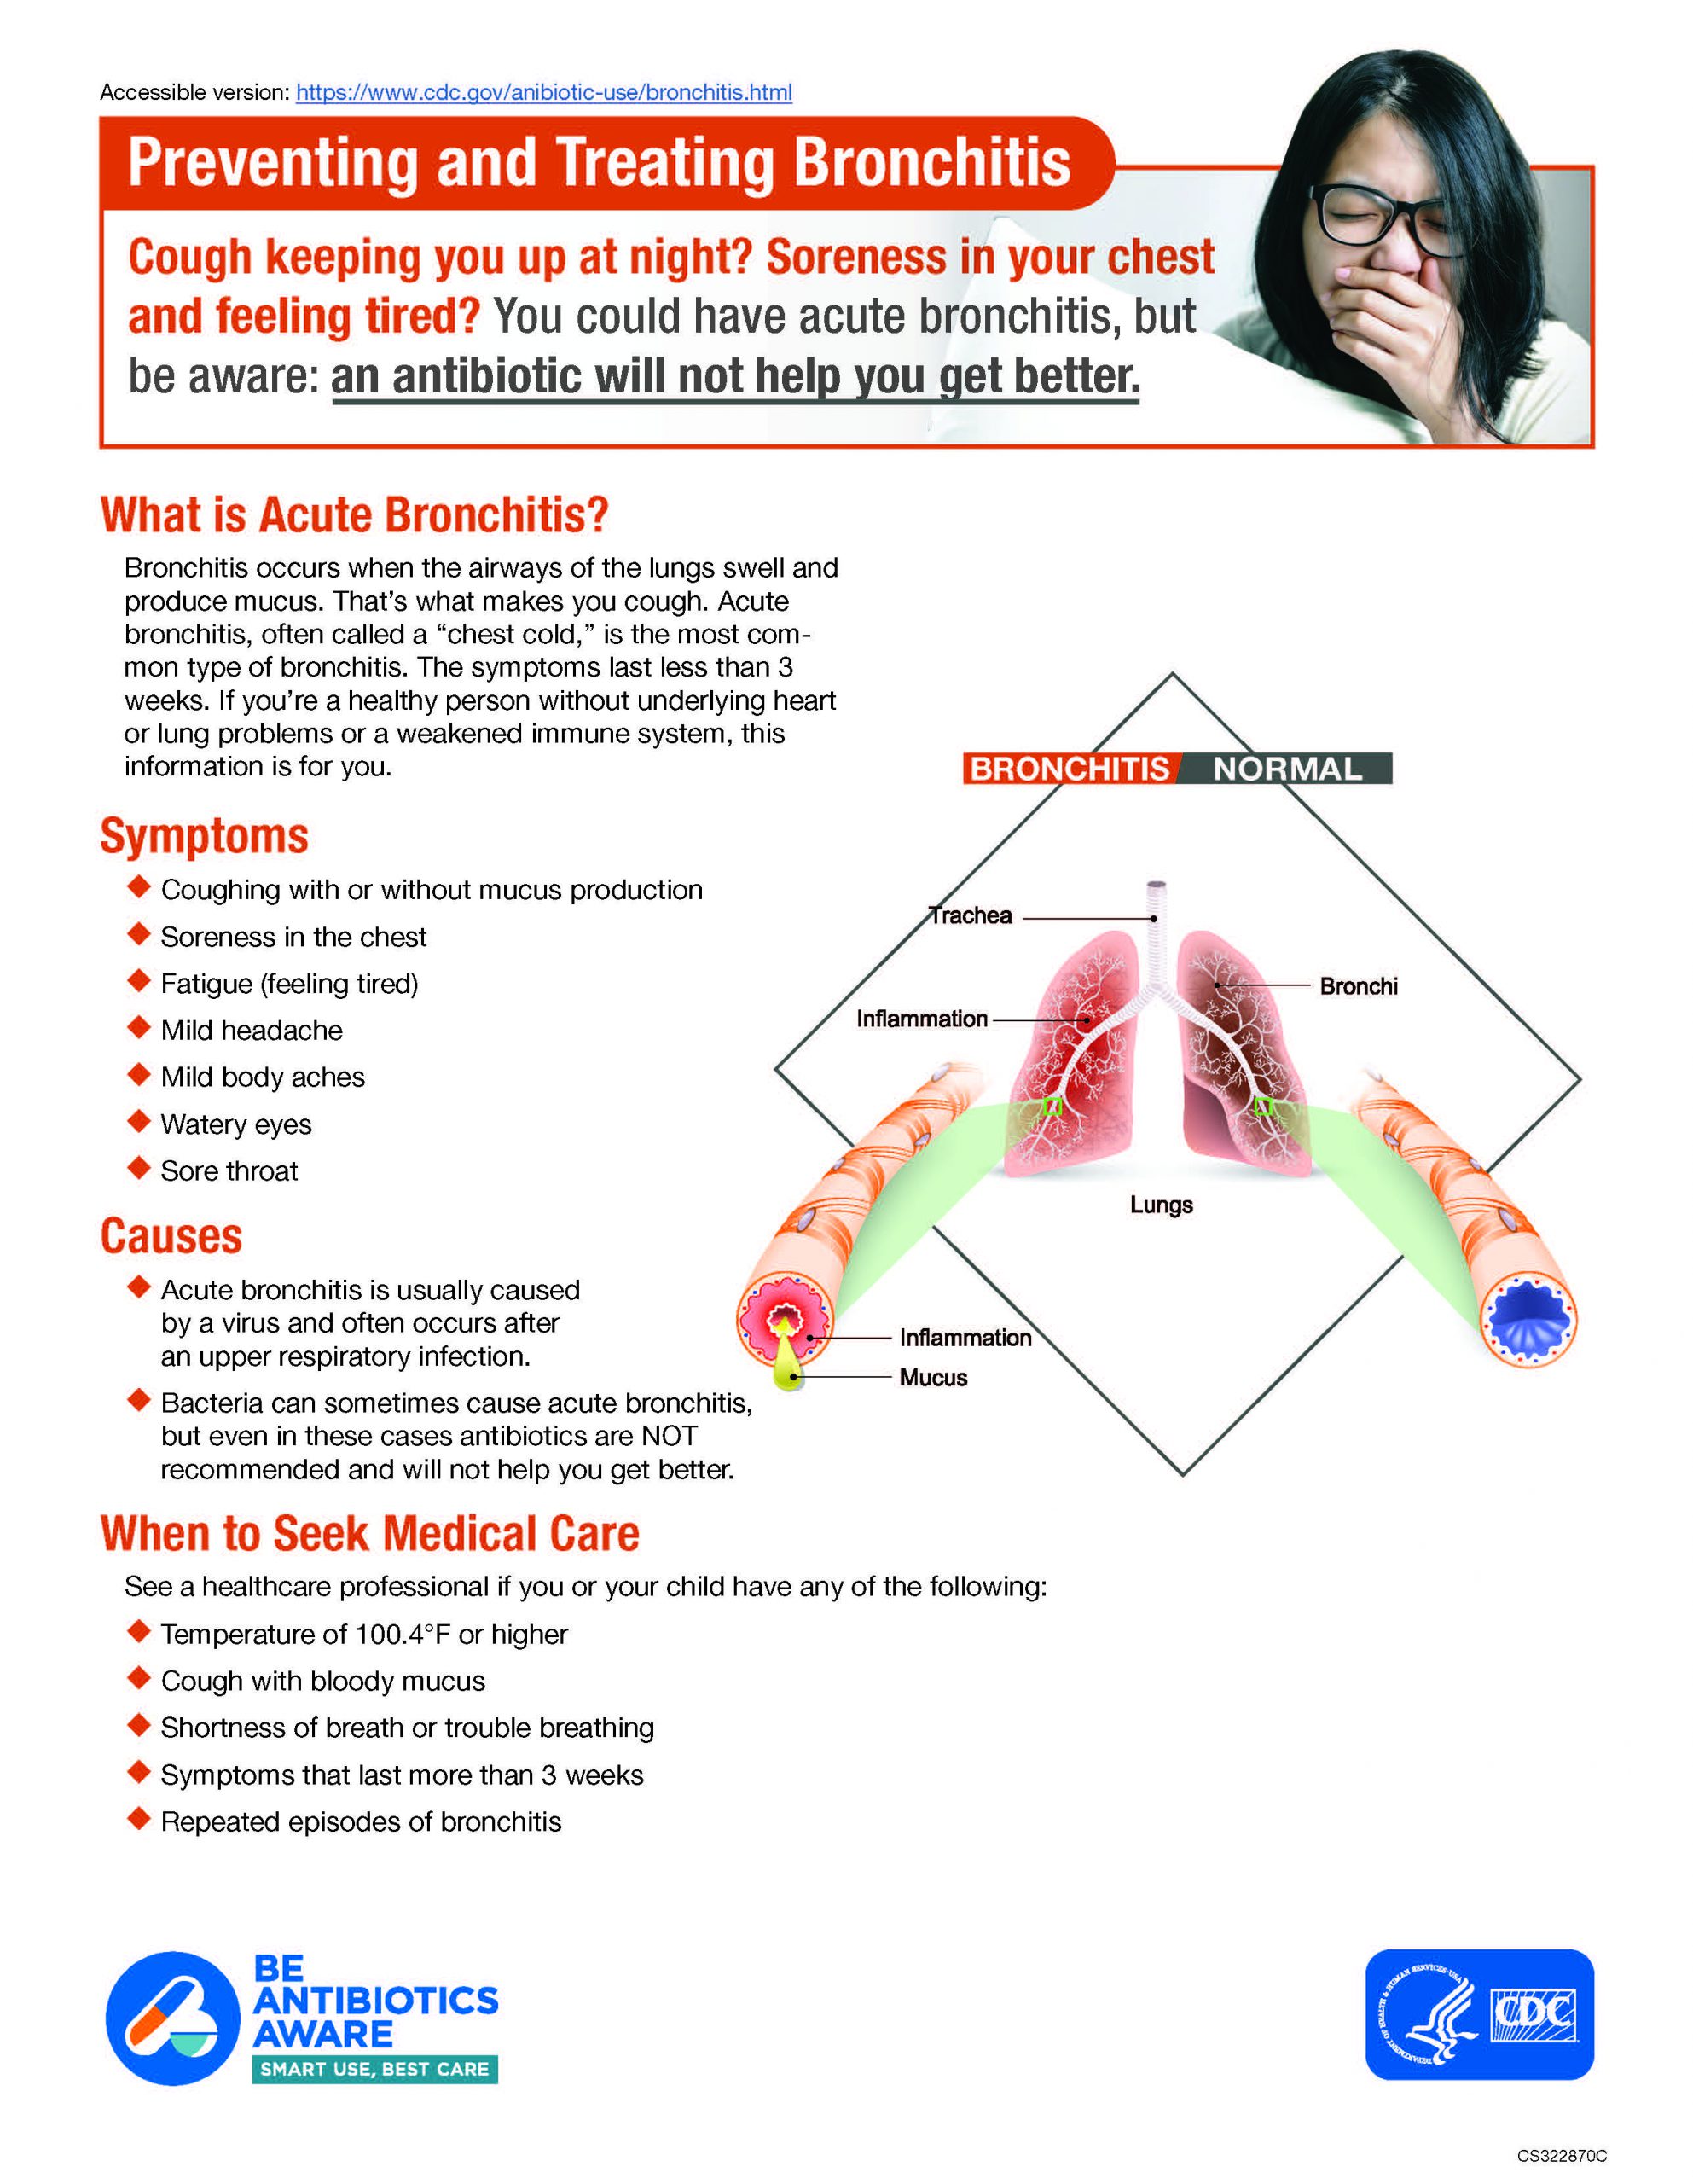 Preventing and Treating Bronchitis